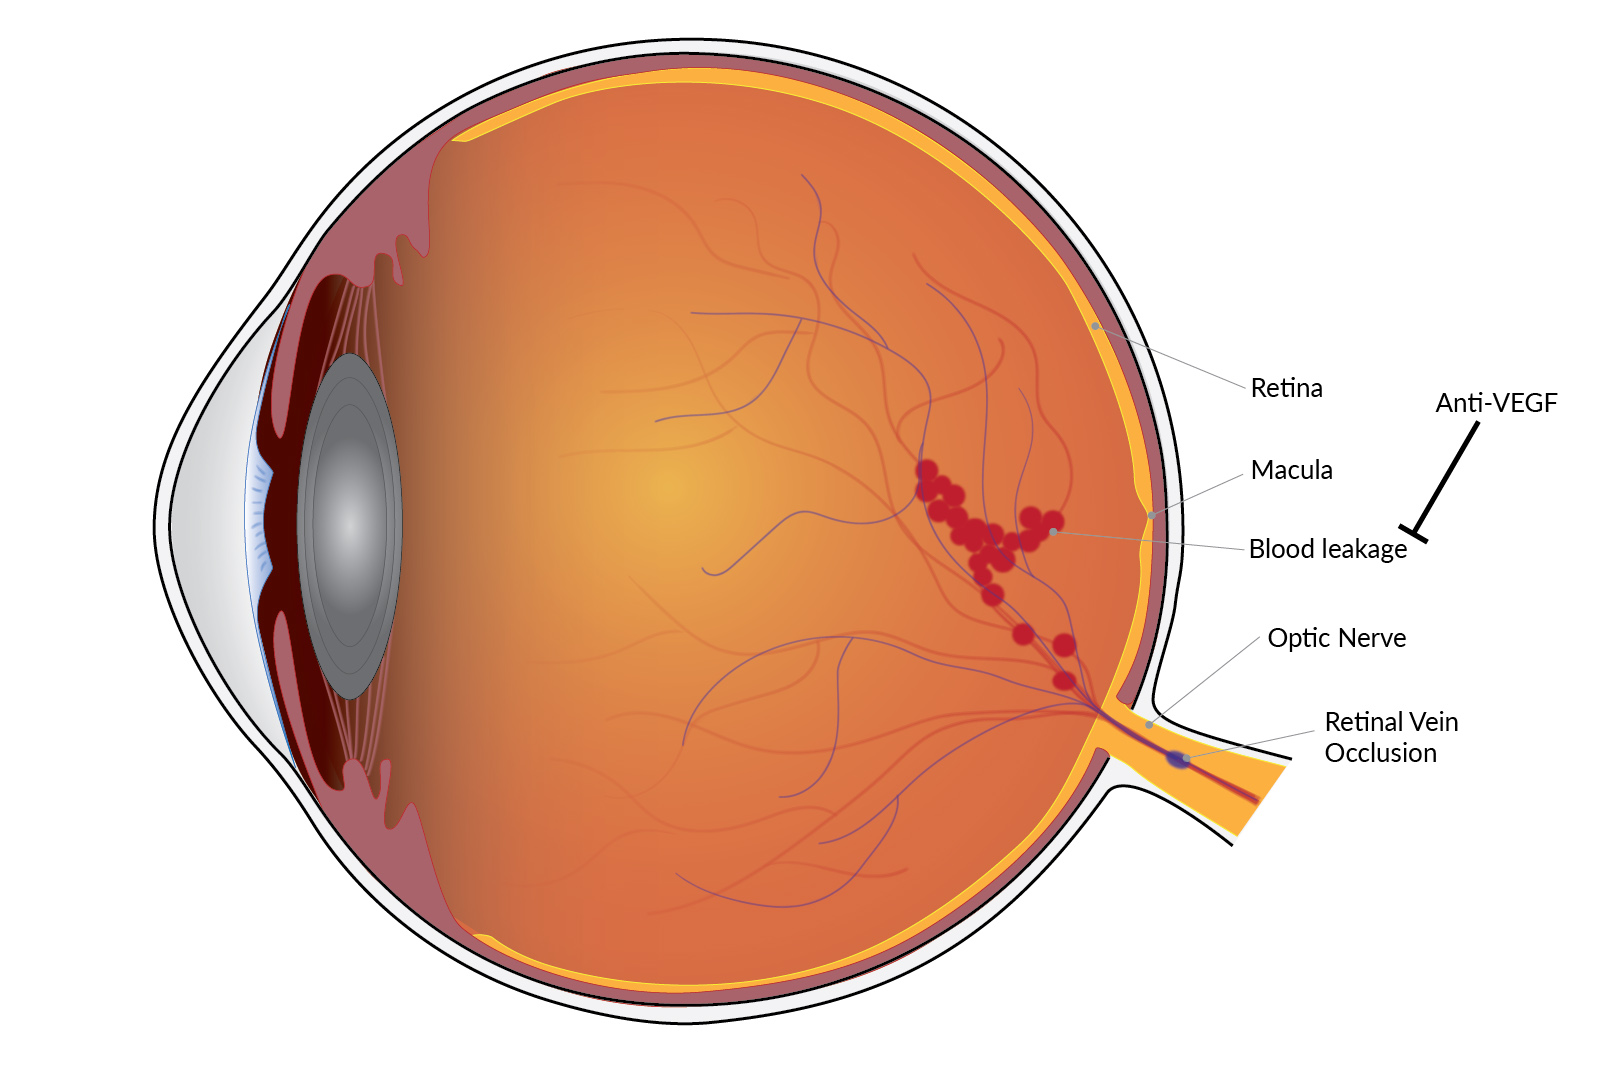 Vision improvement is long-lasting with treatment for blinding